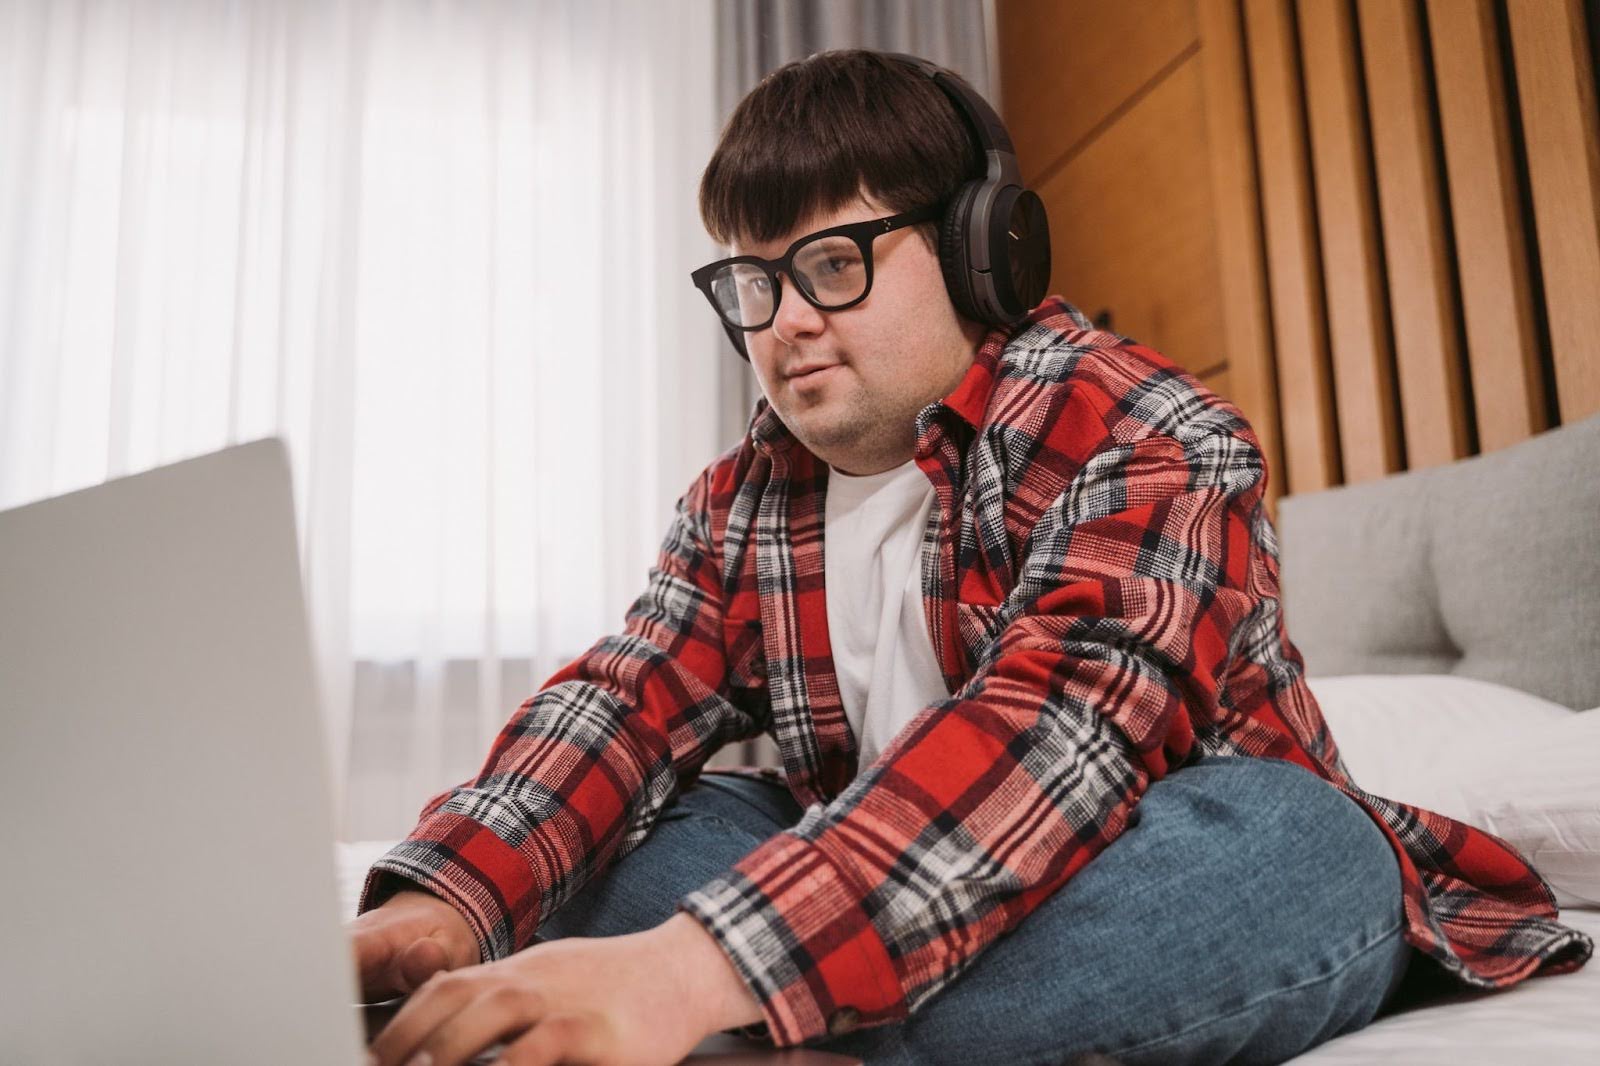 A man with down syndrome works on a laptop